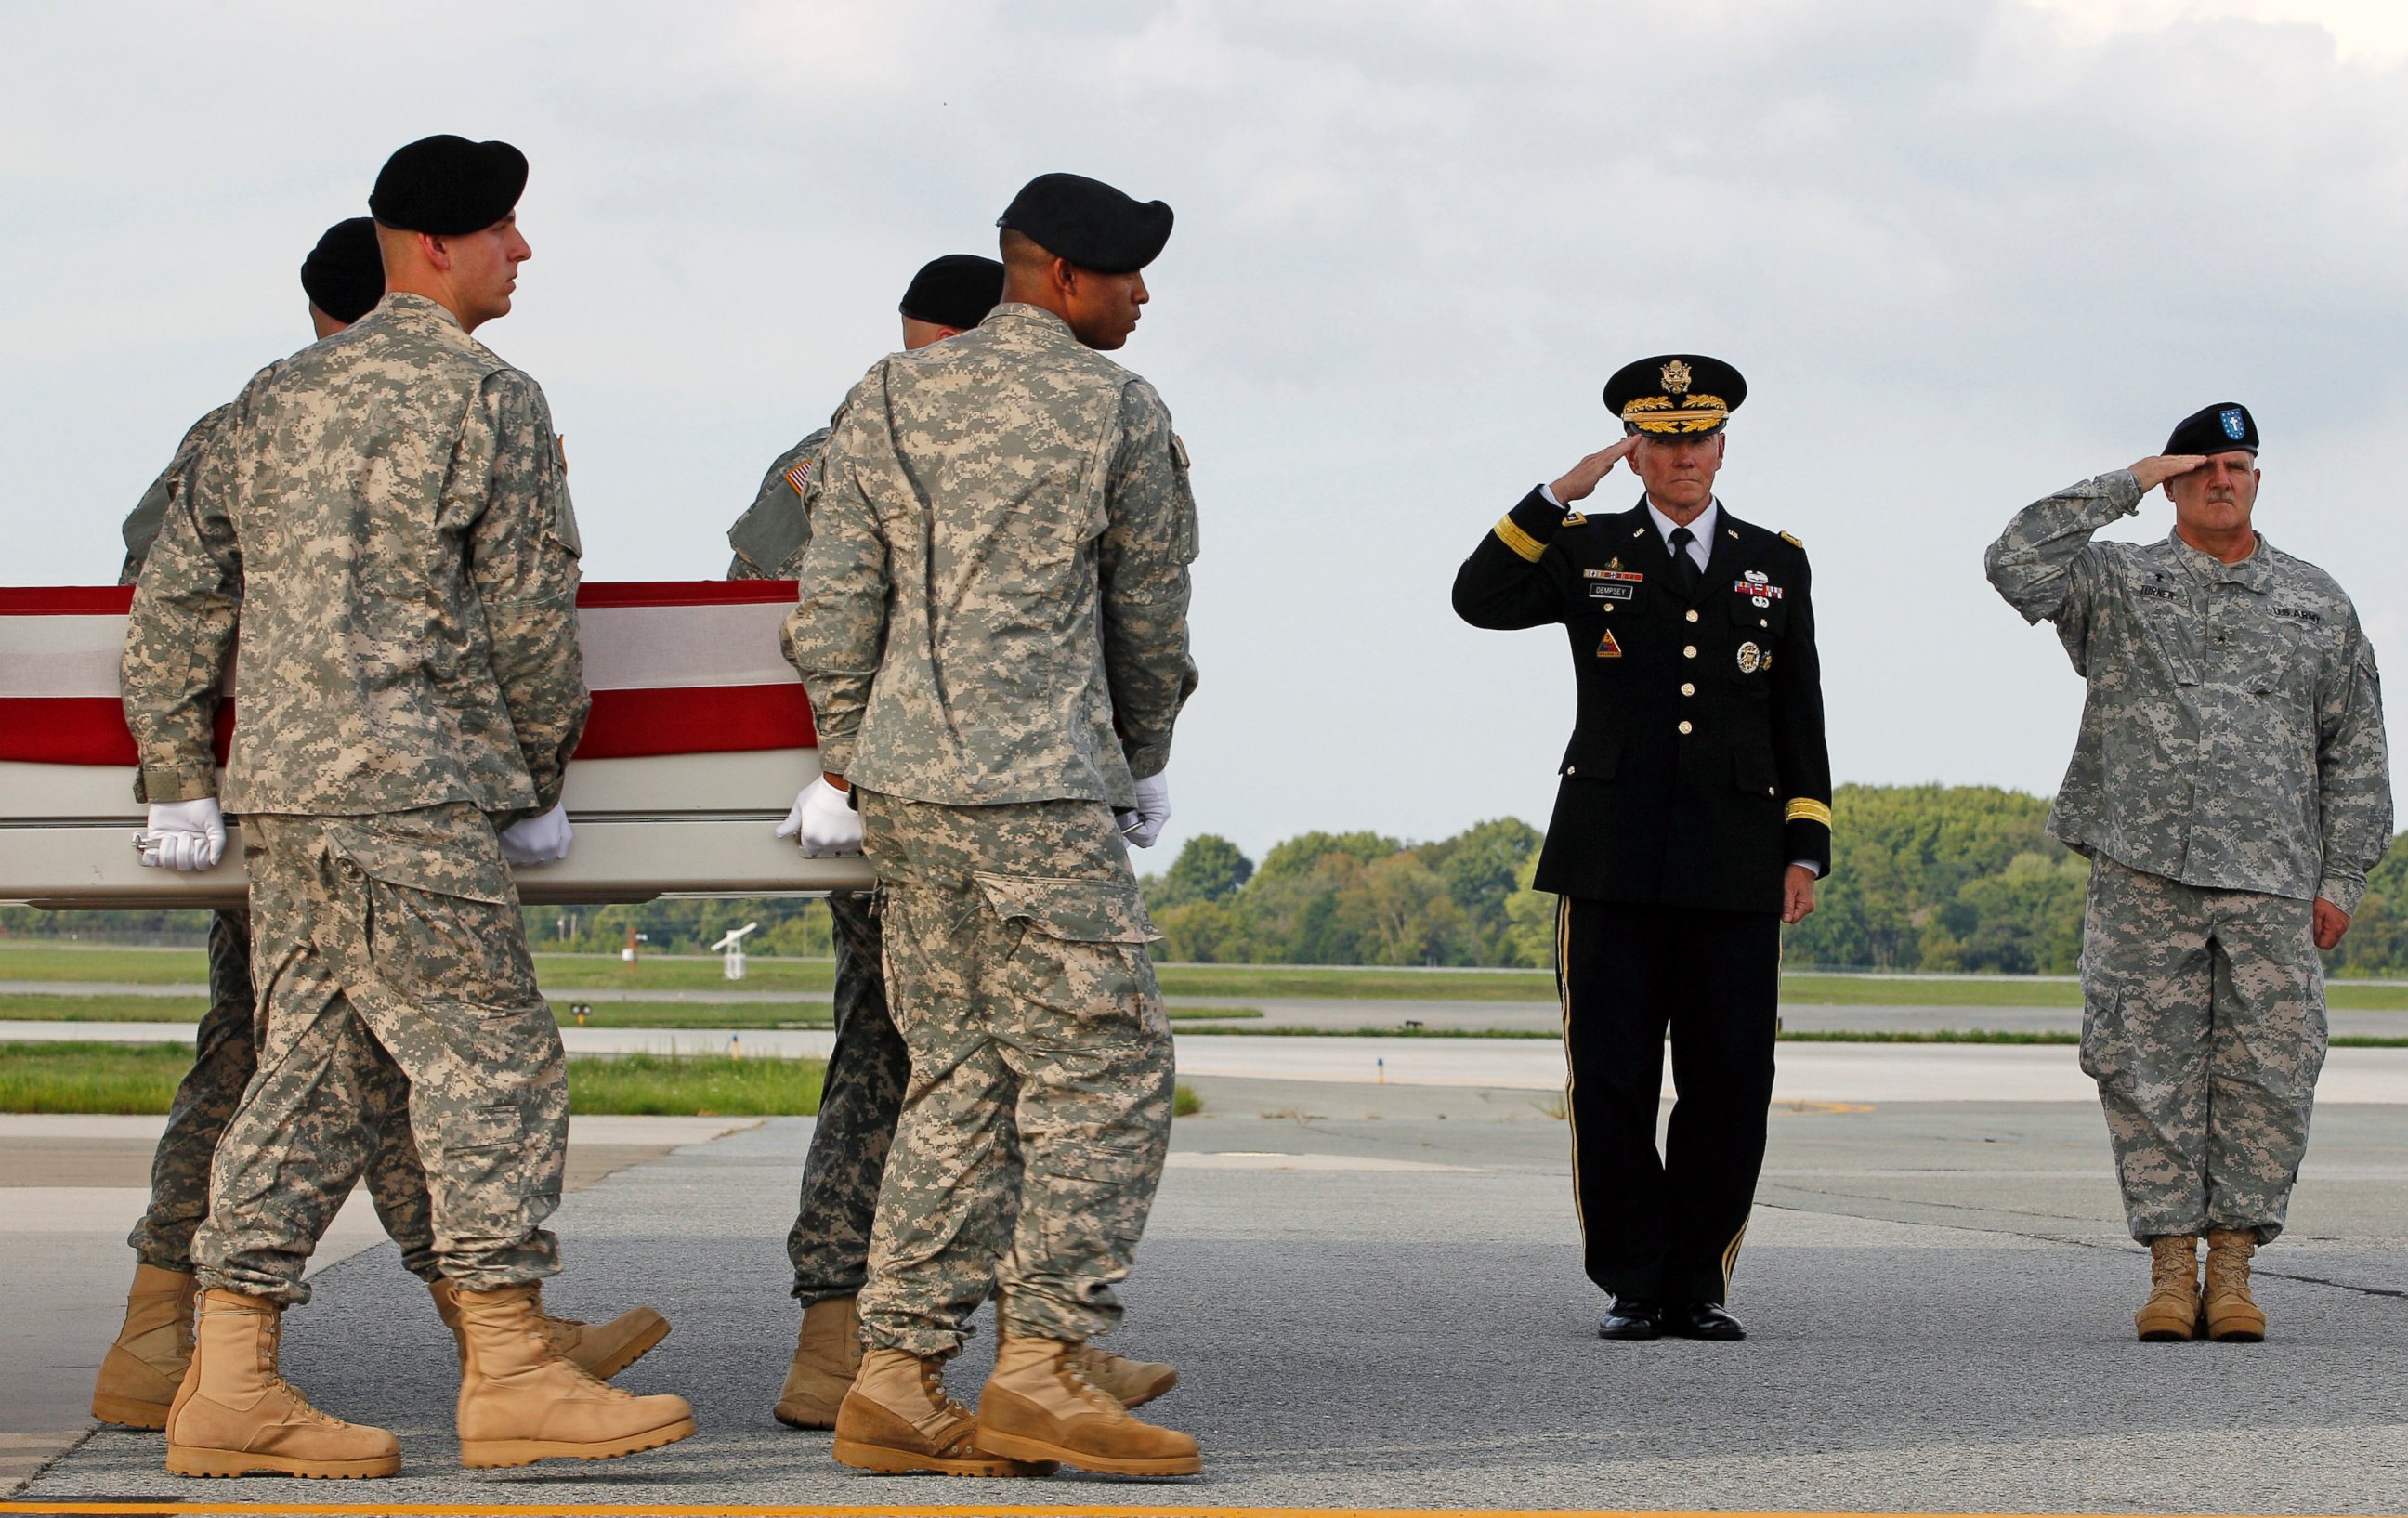 PHOTO: Chairman of the Joint Chiefs of Staff, General Martin E. Dempsey, left, and Army Brig. Gen. Frank D. Turner III salute at Dover Air Force Base, Del., Aug. 10, 2012.